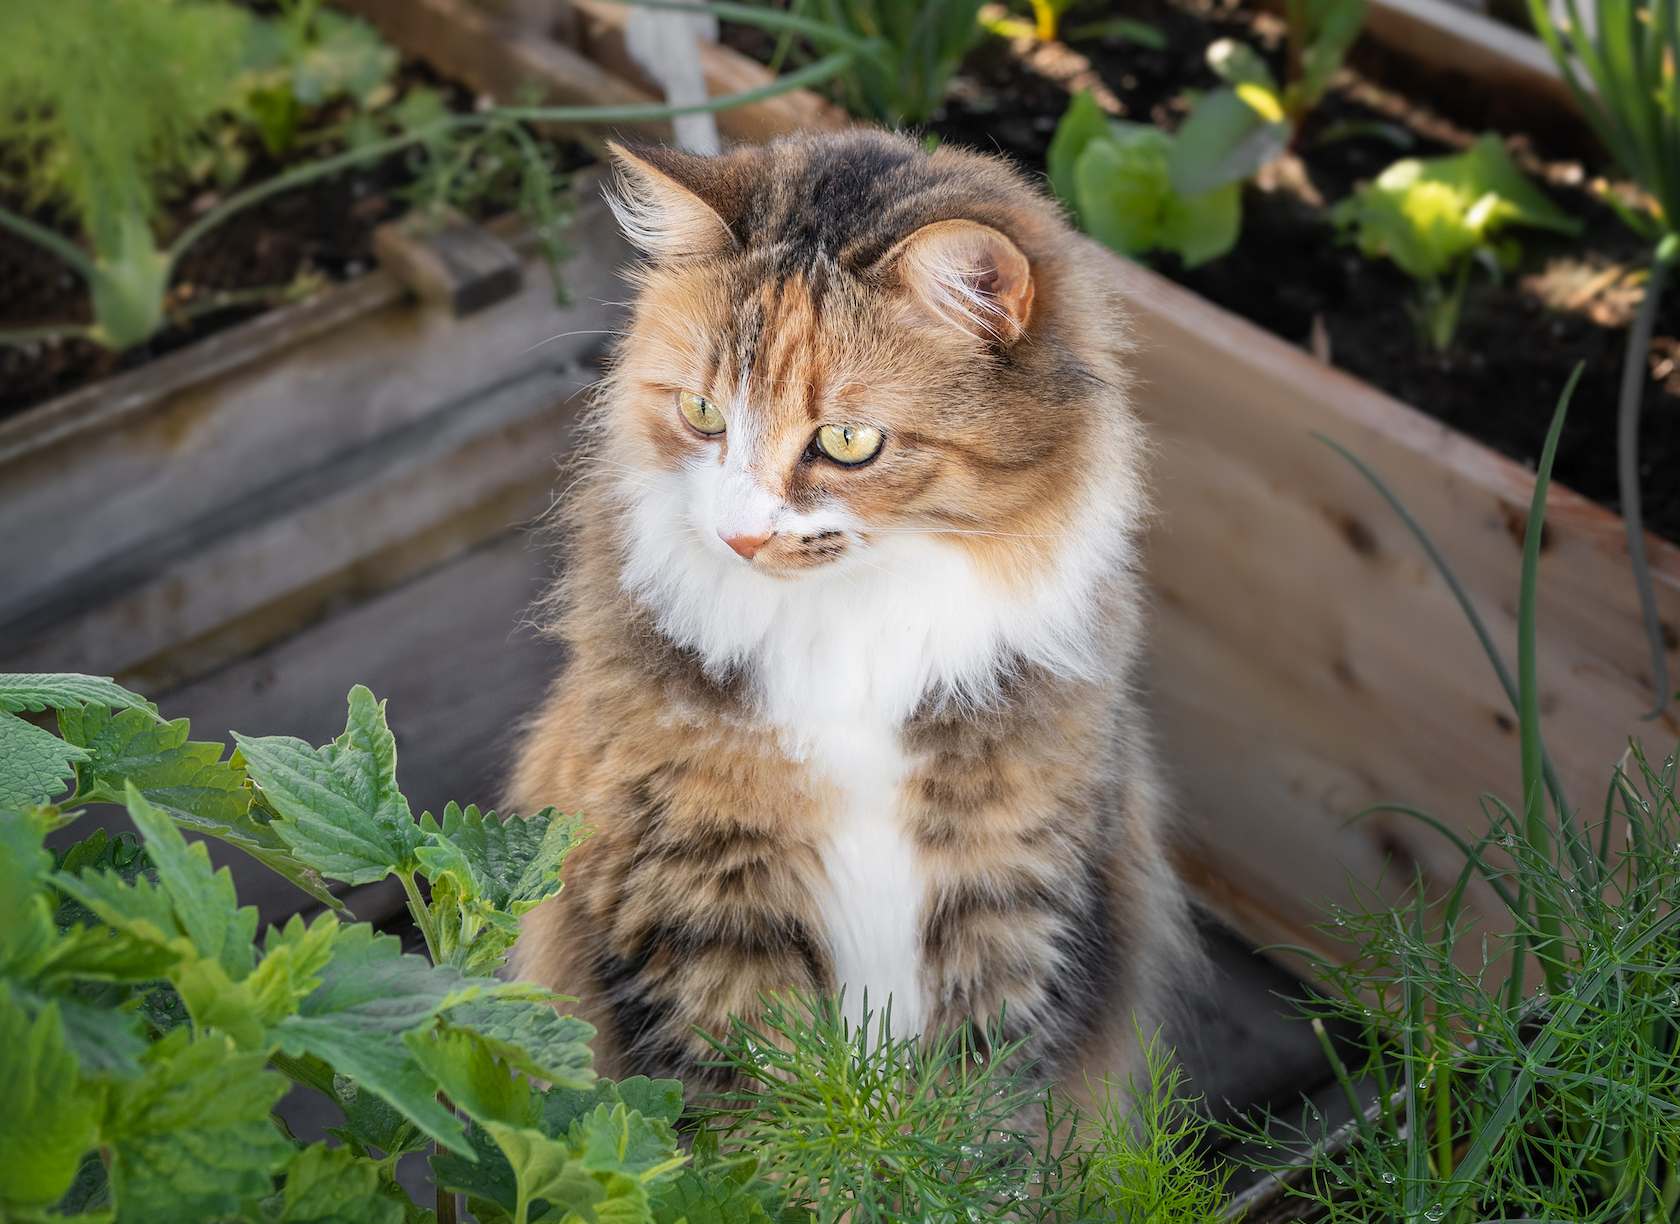 Adorable cat behind cat mint, looking at something. Curios multicolored female torbie kitty framed by garden planters and foliage. Striking asymmetric face markings and yellow eyes. Selective focus.